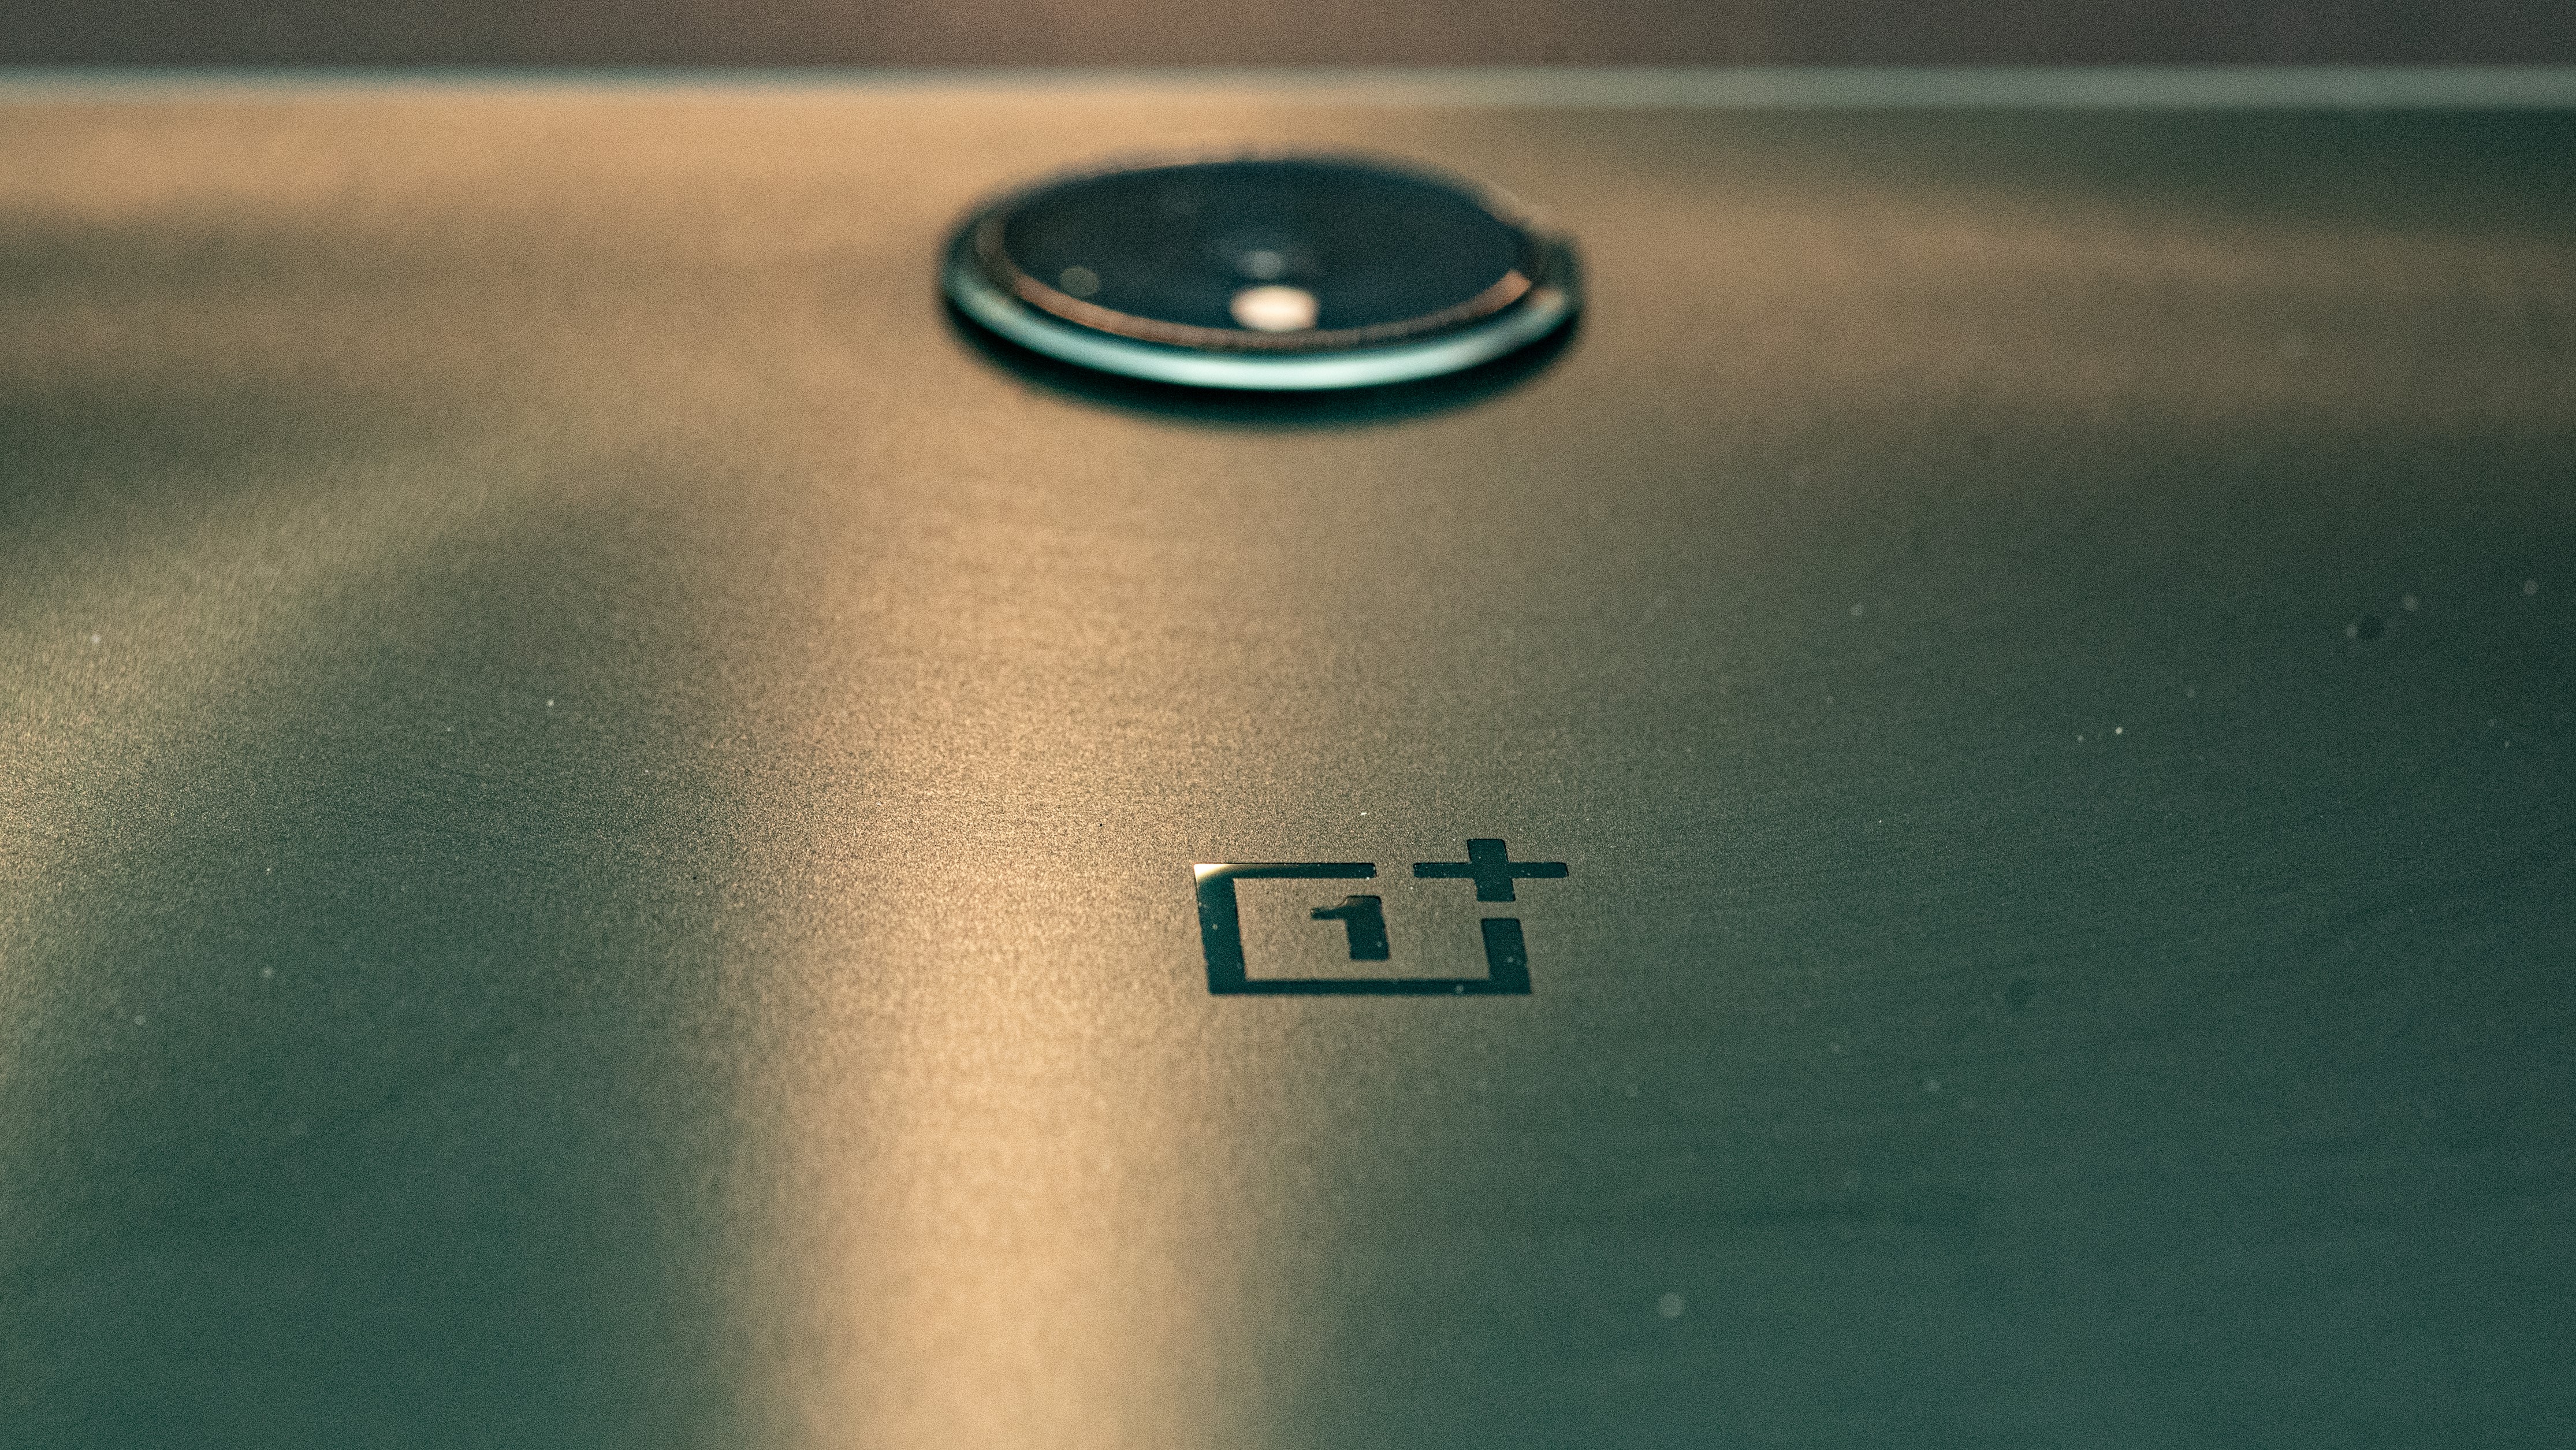 OnePlus Pad with radial brushed metal pattern showing